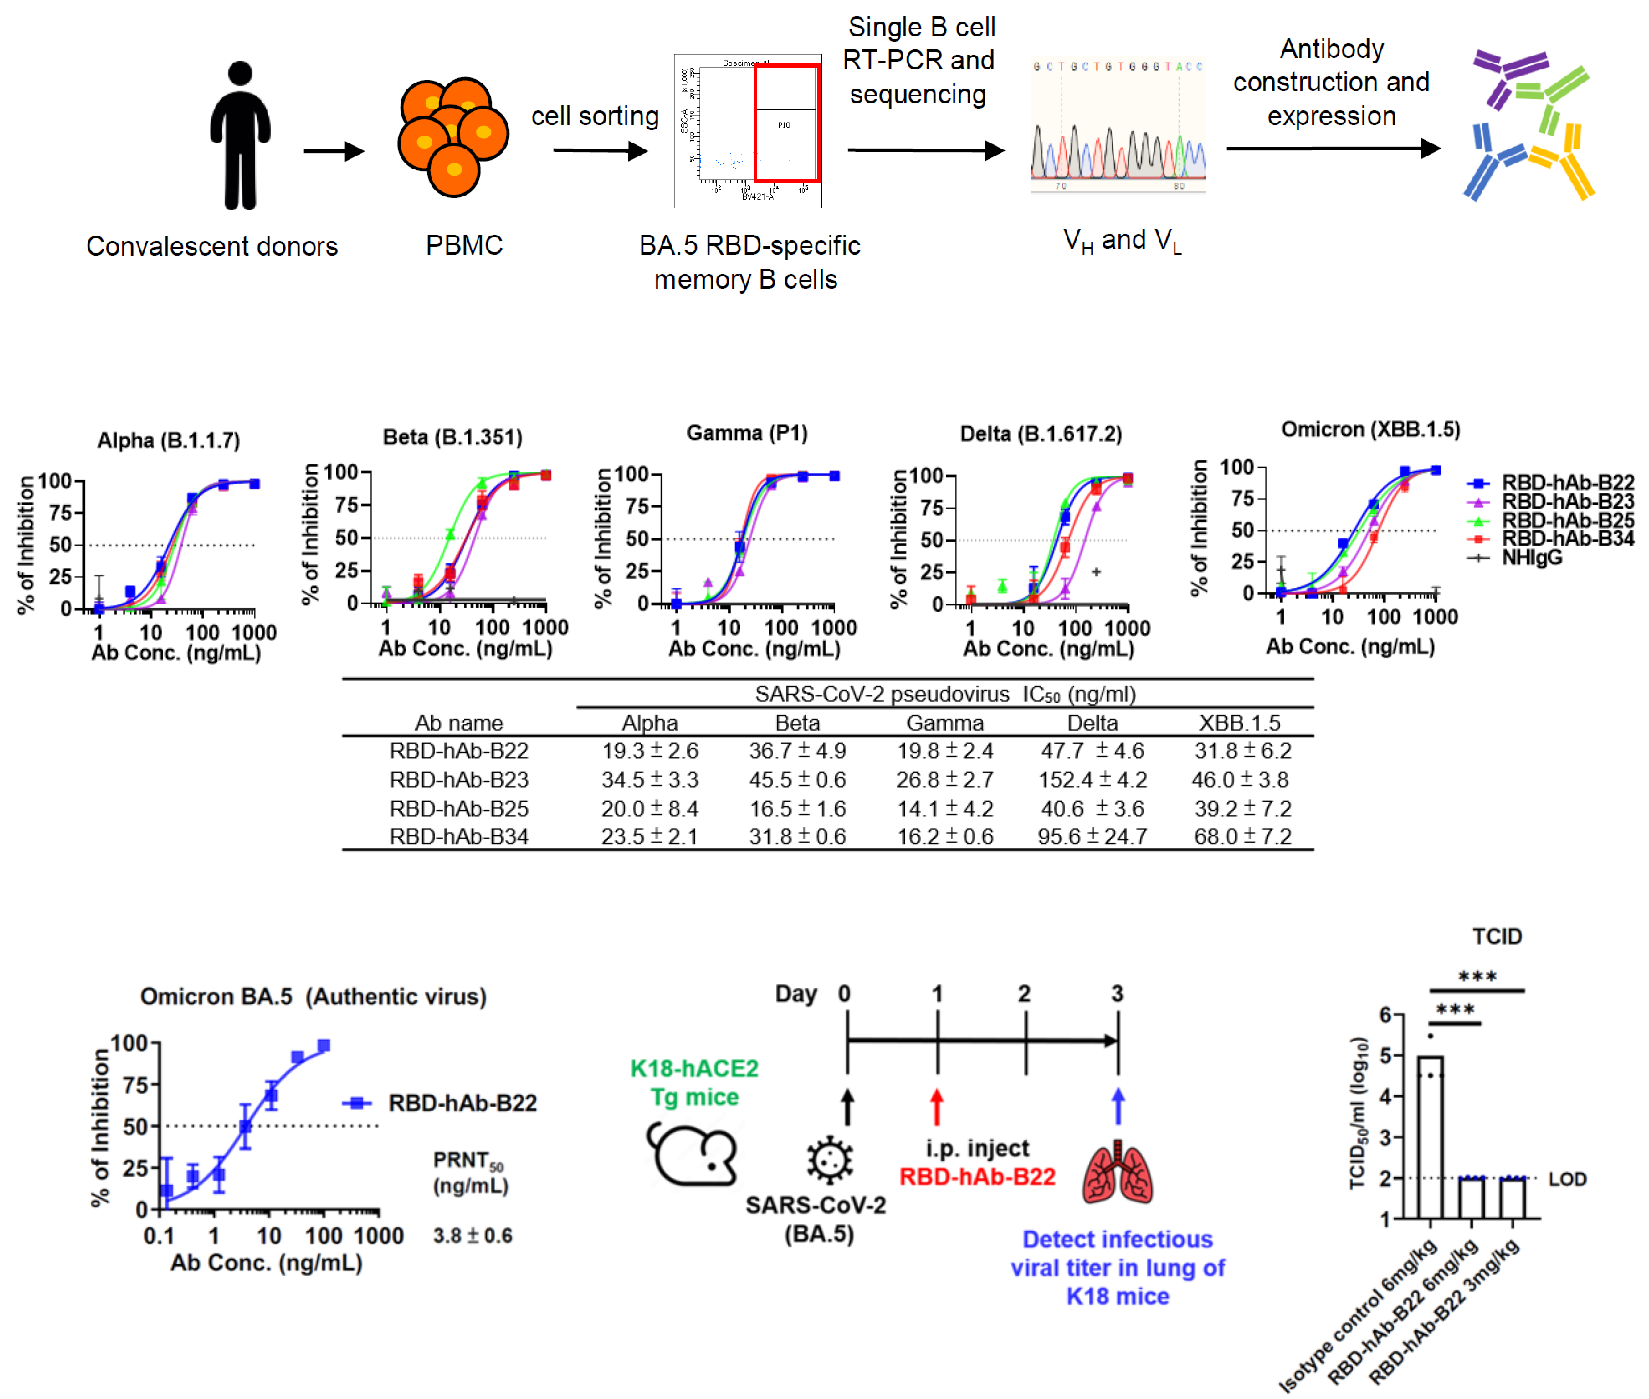 Development of the potently and broadly neutralizing human antibodies against SARS-CoV-2 from Alpha to Omicron XBB.1.5